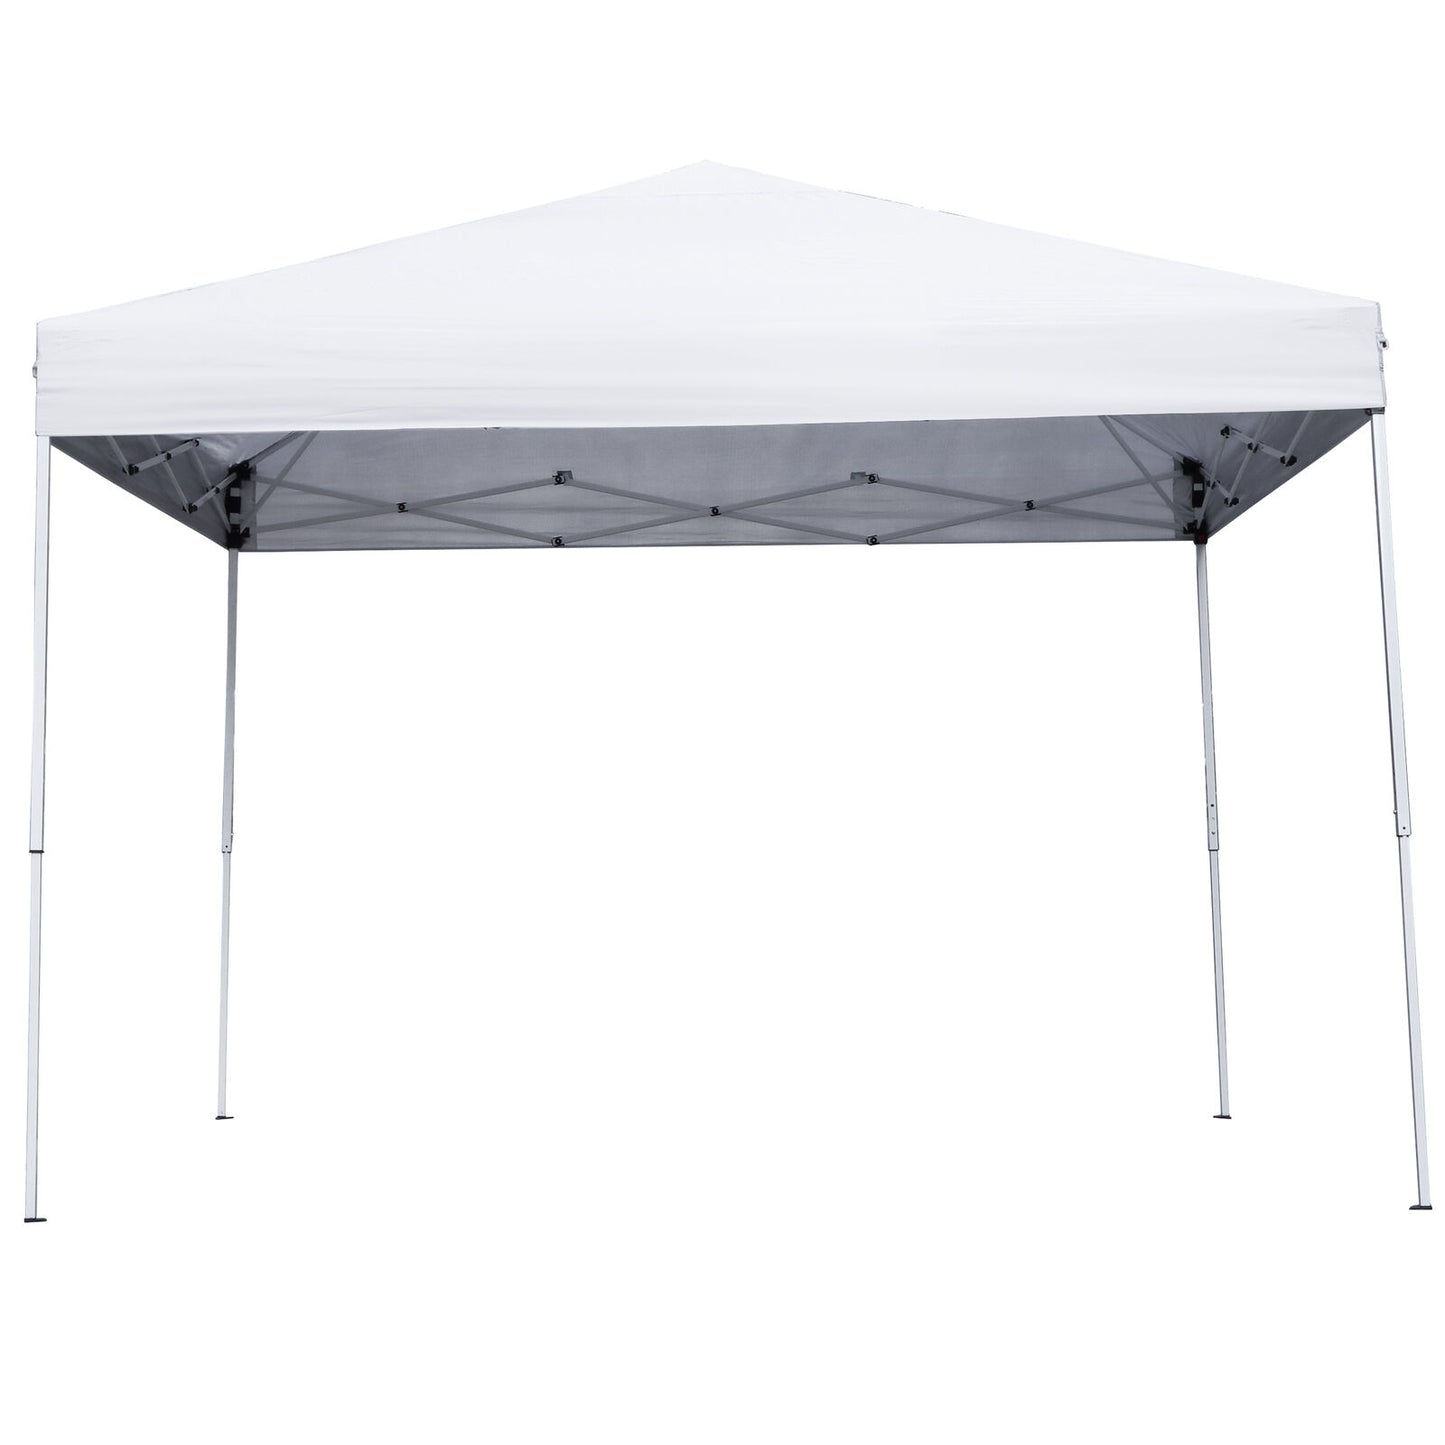 Durable 10x10 FT Pop-Up Foldable Waterproof Canopy Tent Adjustable Heights W/Bag